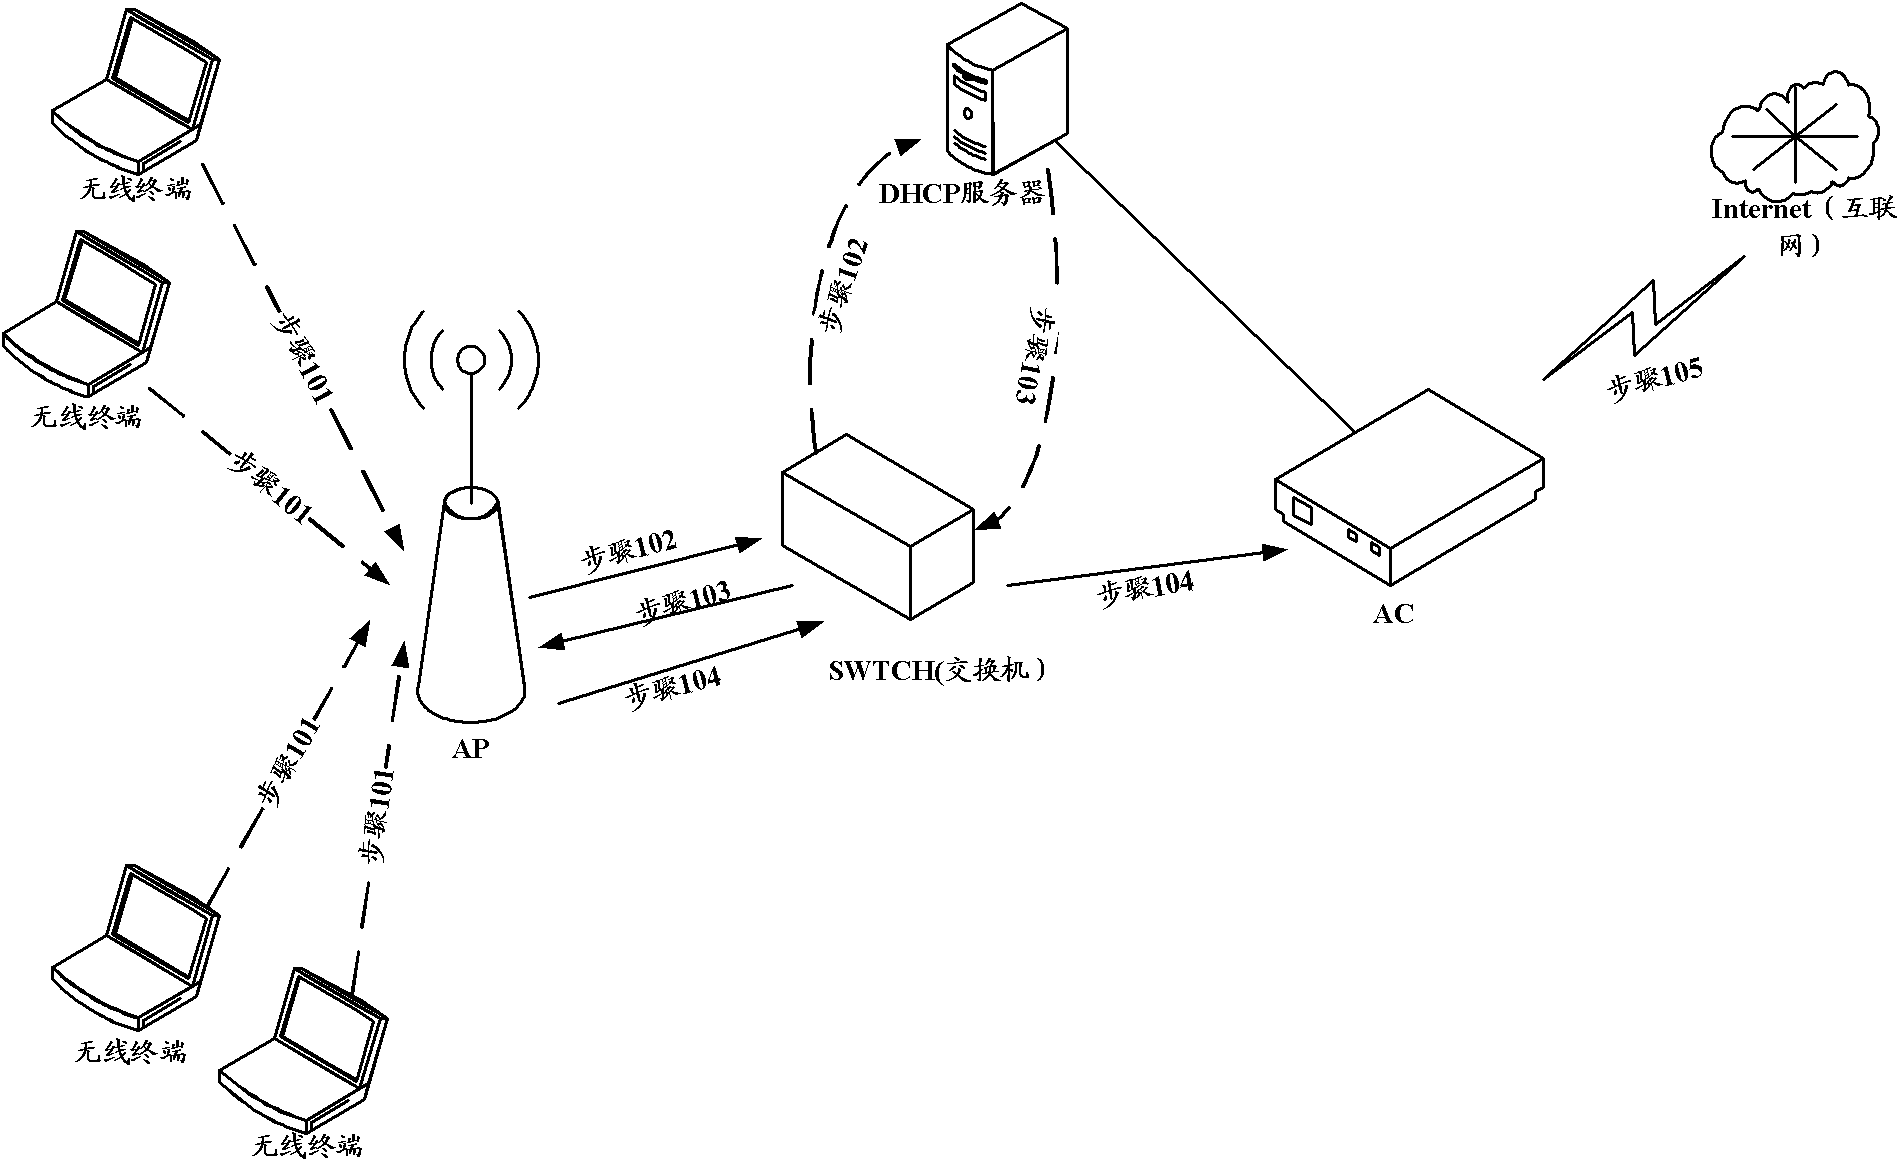 Method, device and system for assigning IP (Internet Protocol) address in wireless LAN (Local Area Network)